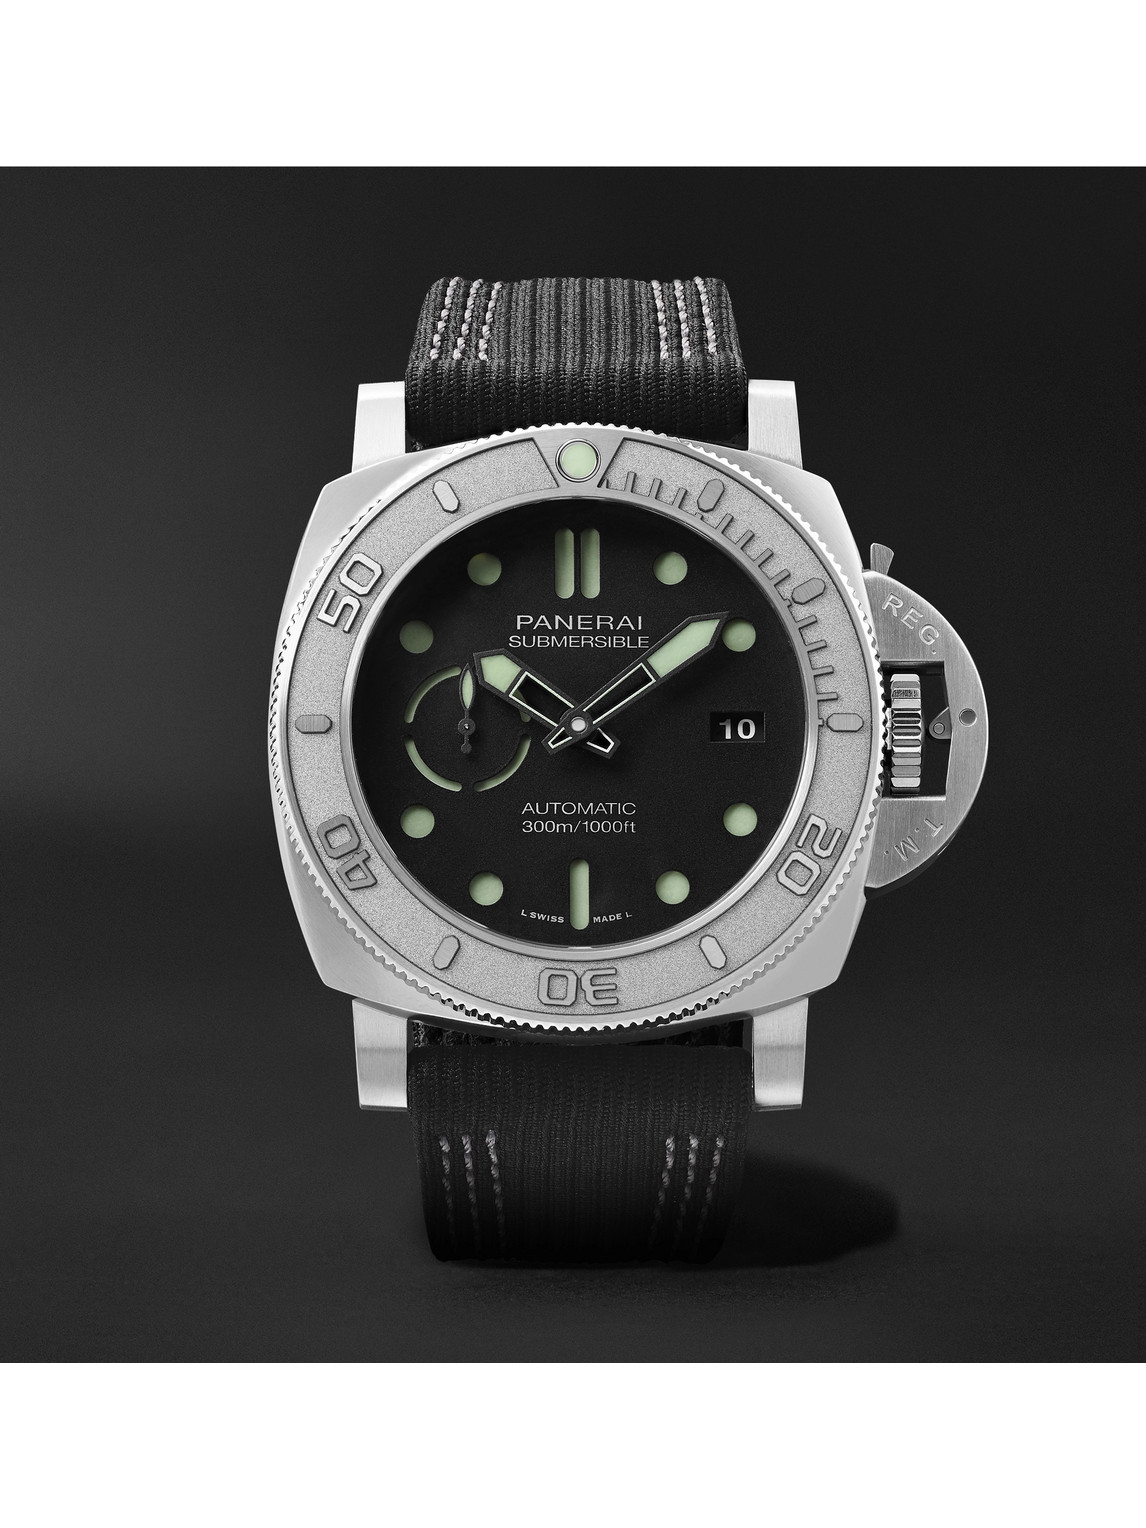 Panerai Submersible Mike Horn Edition Automatic 47mm Eco-titanium And Pet Watch, Ref. No. Pam00984 In Black